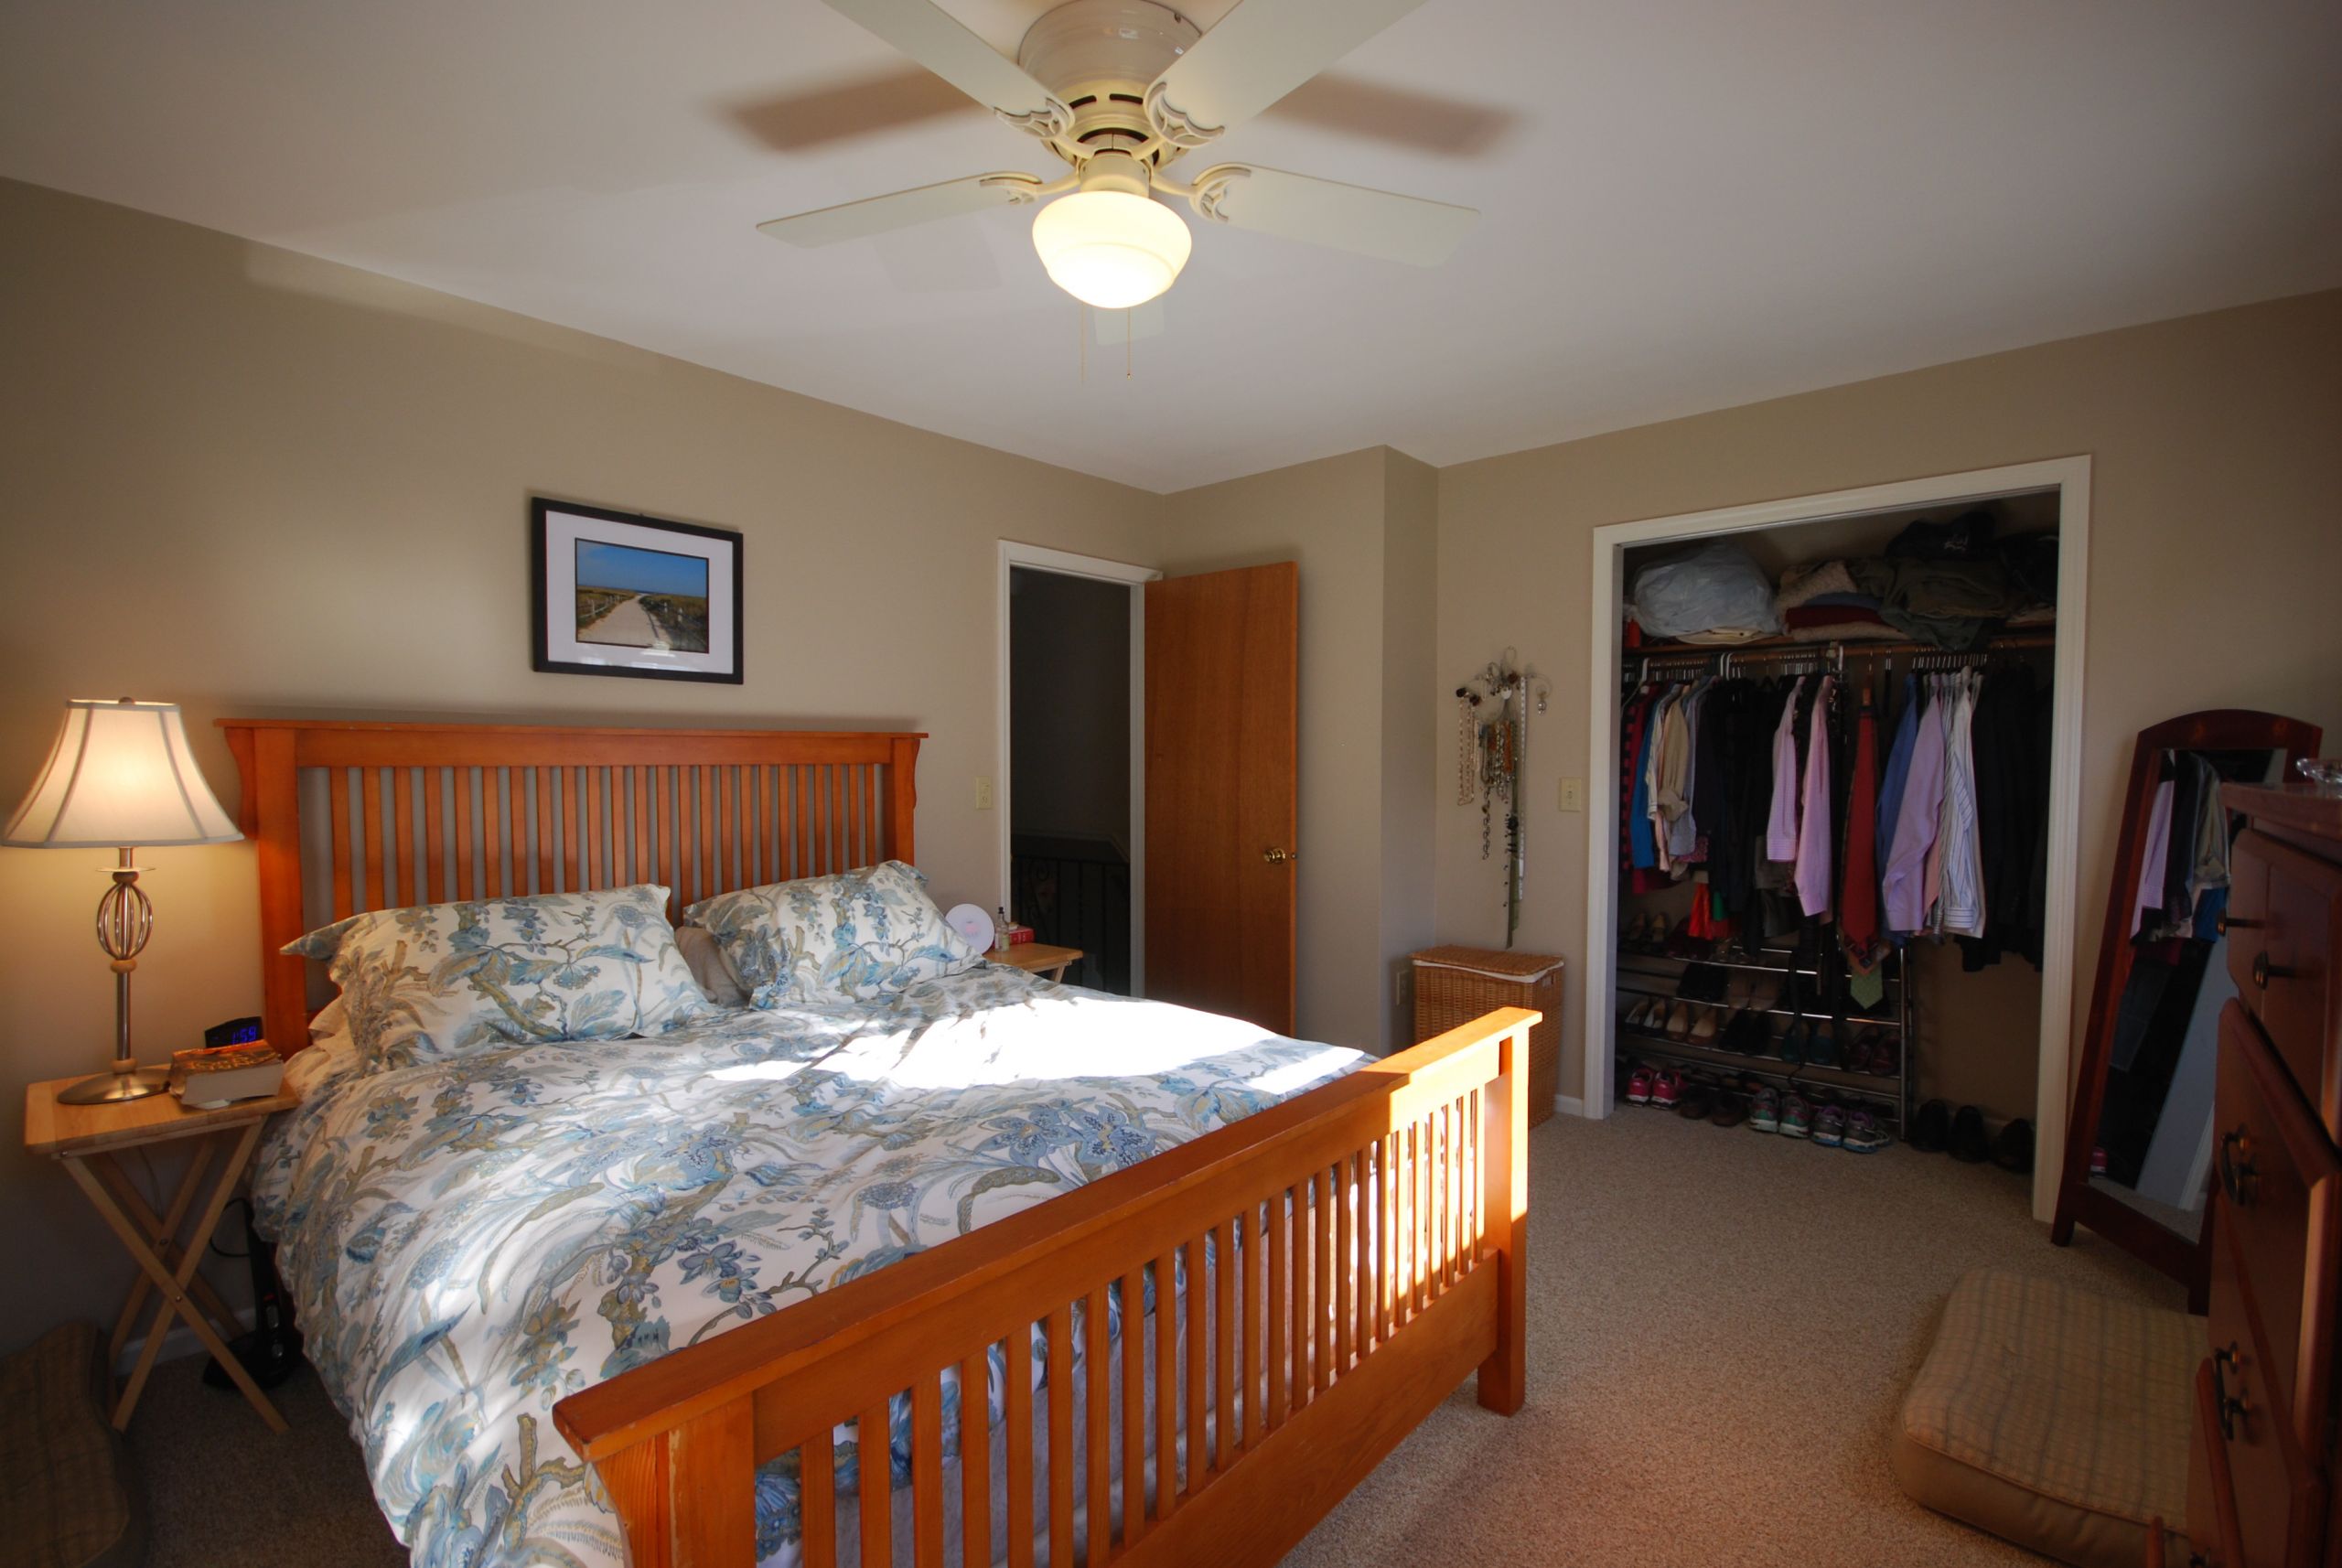 Master Bedroom Closets
 The Best Way of Decorating Master Bedroom with Walk in